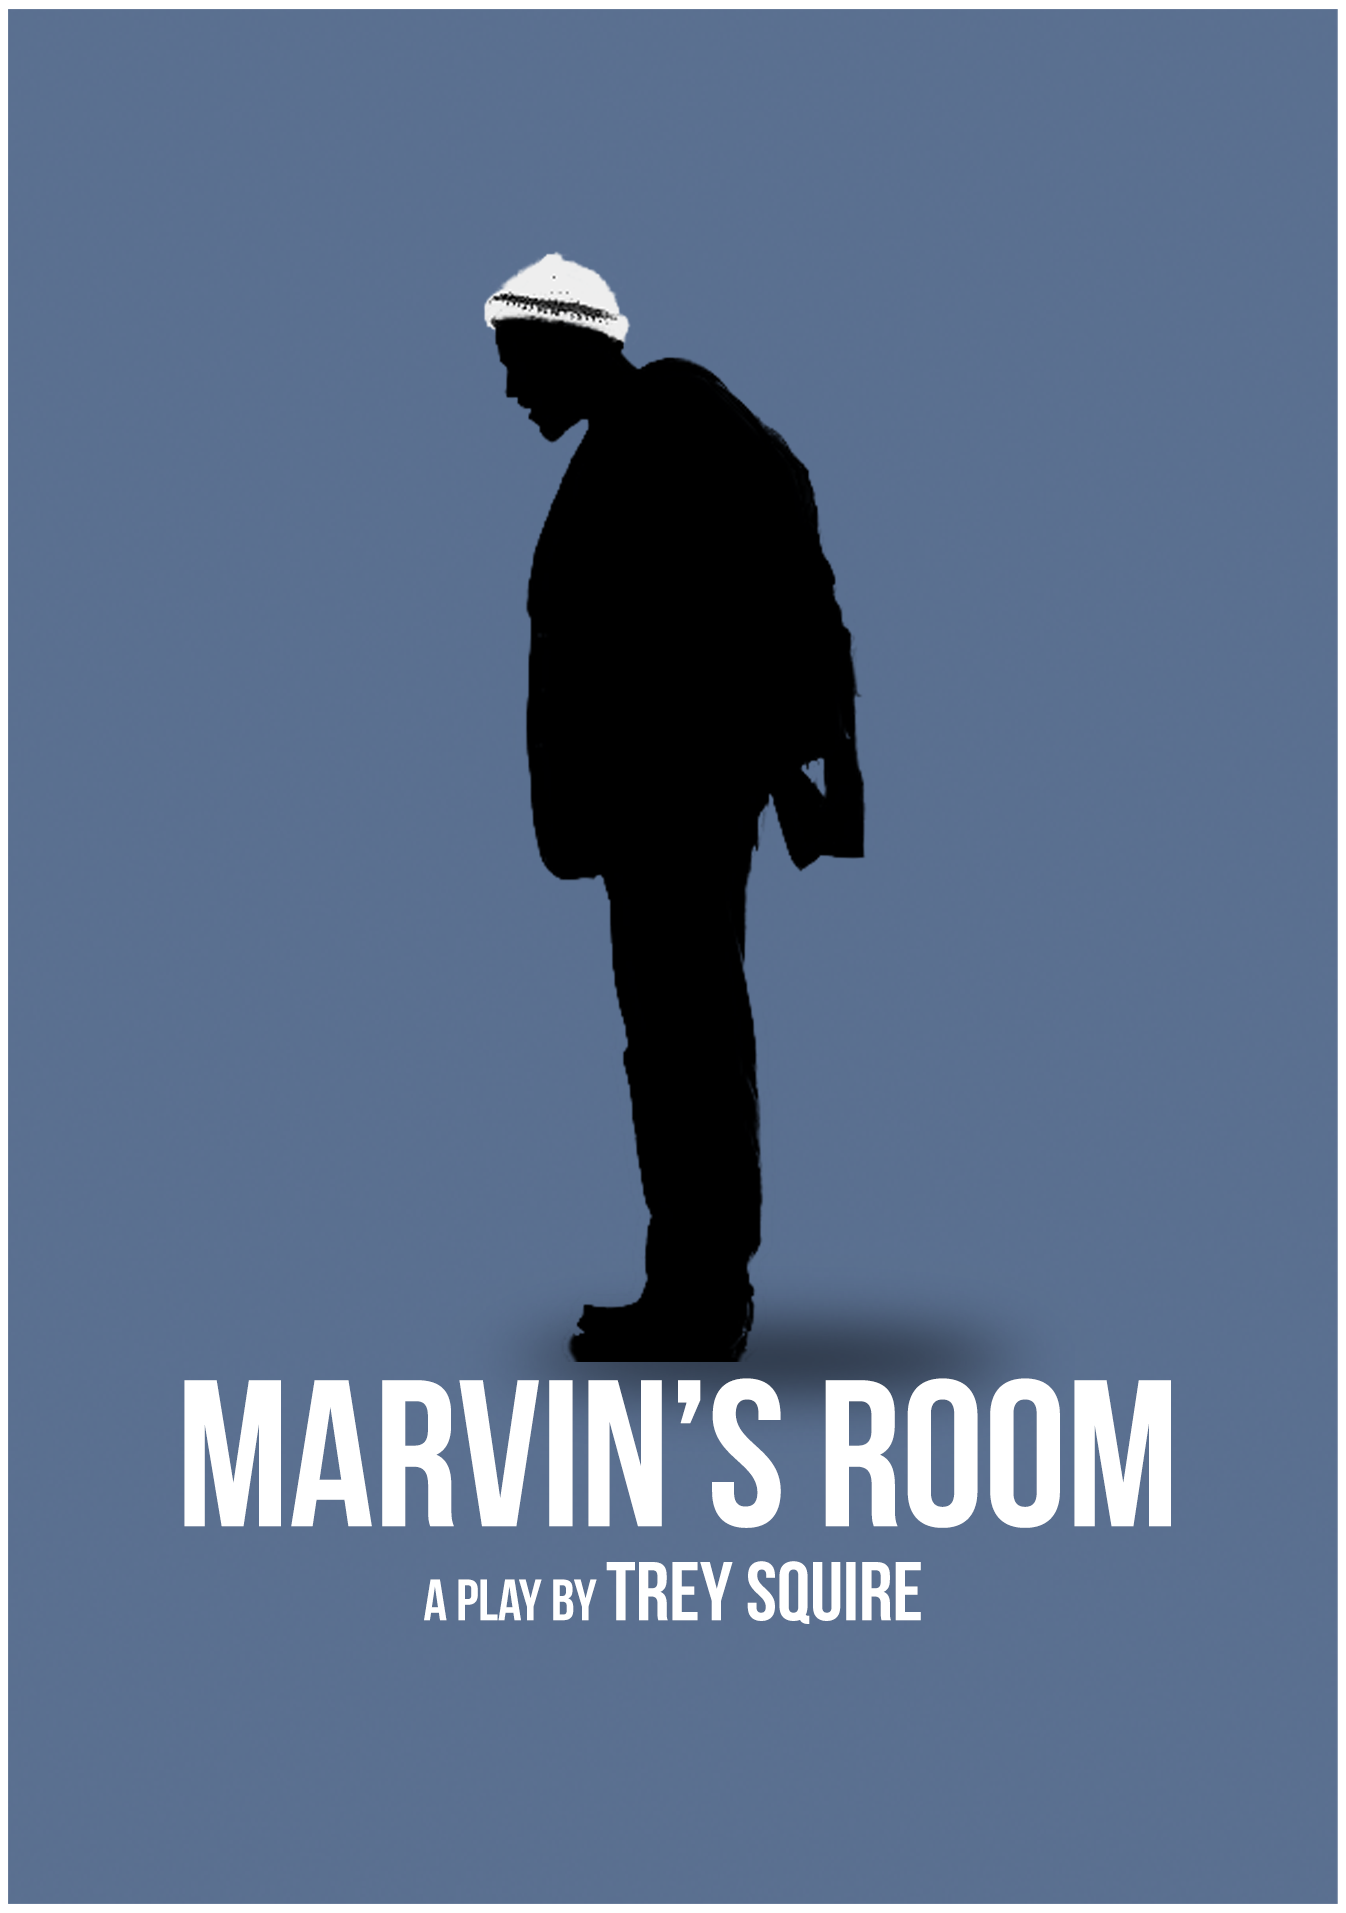 Marvin's Room